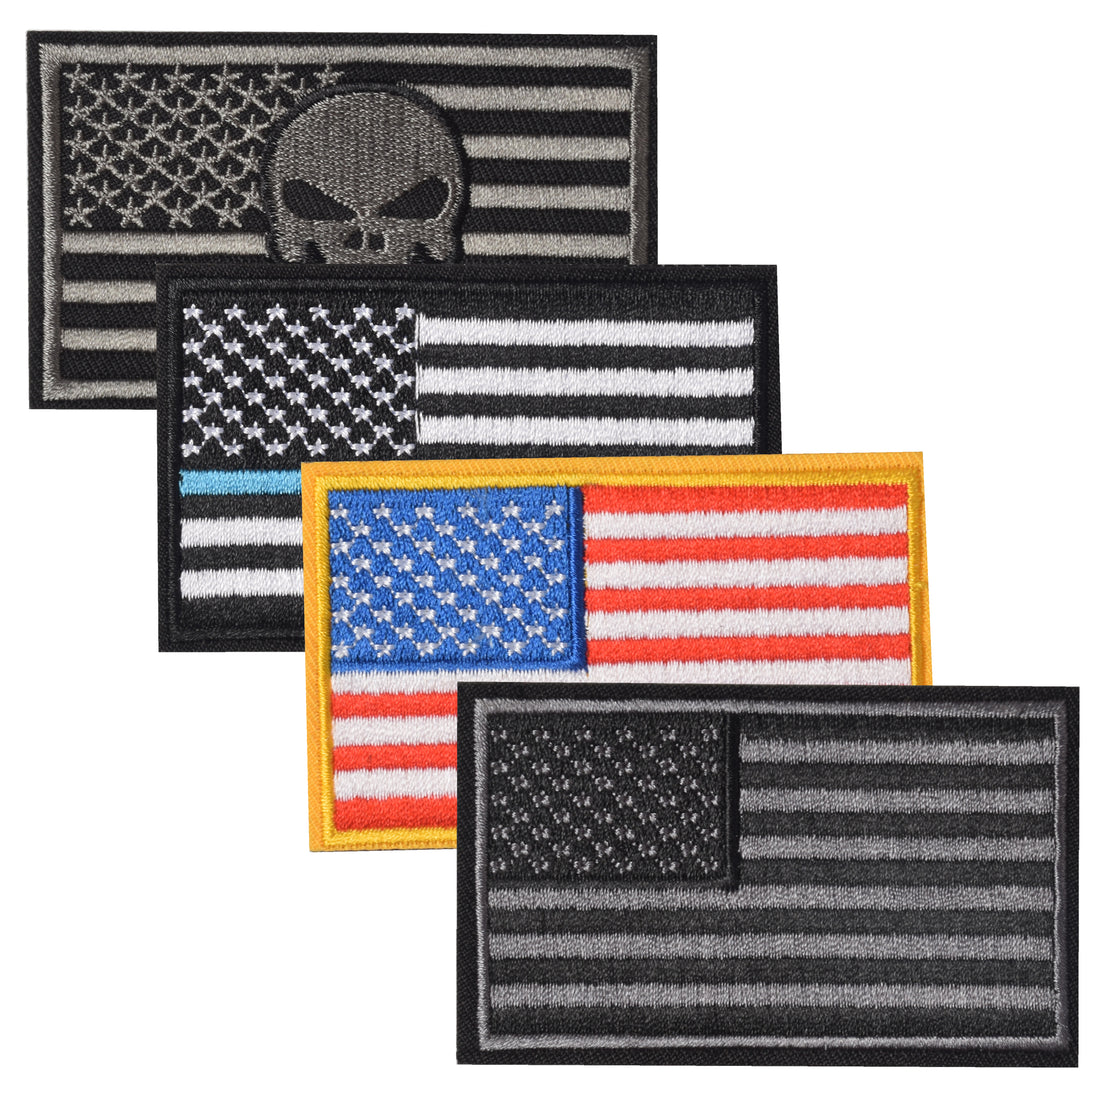 4 Pieces USA Flag Patches, Tactical Tags Morale National Emblem Patch for Travel Backpack Hats Jackets Team Uniform